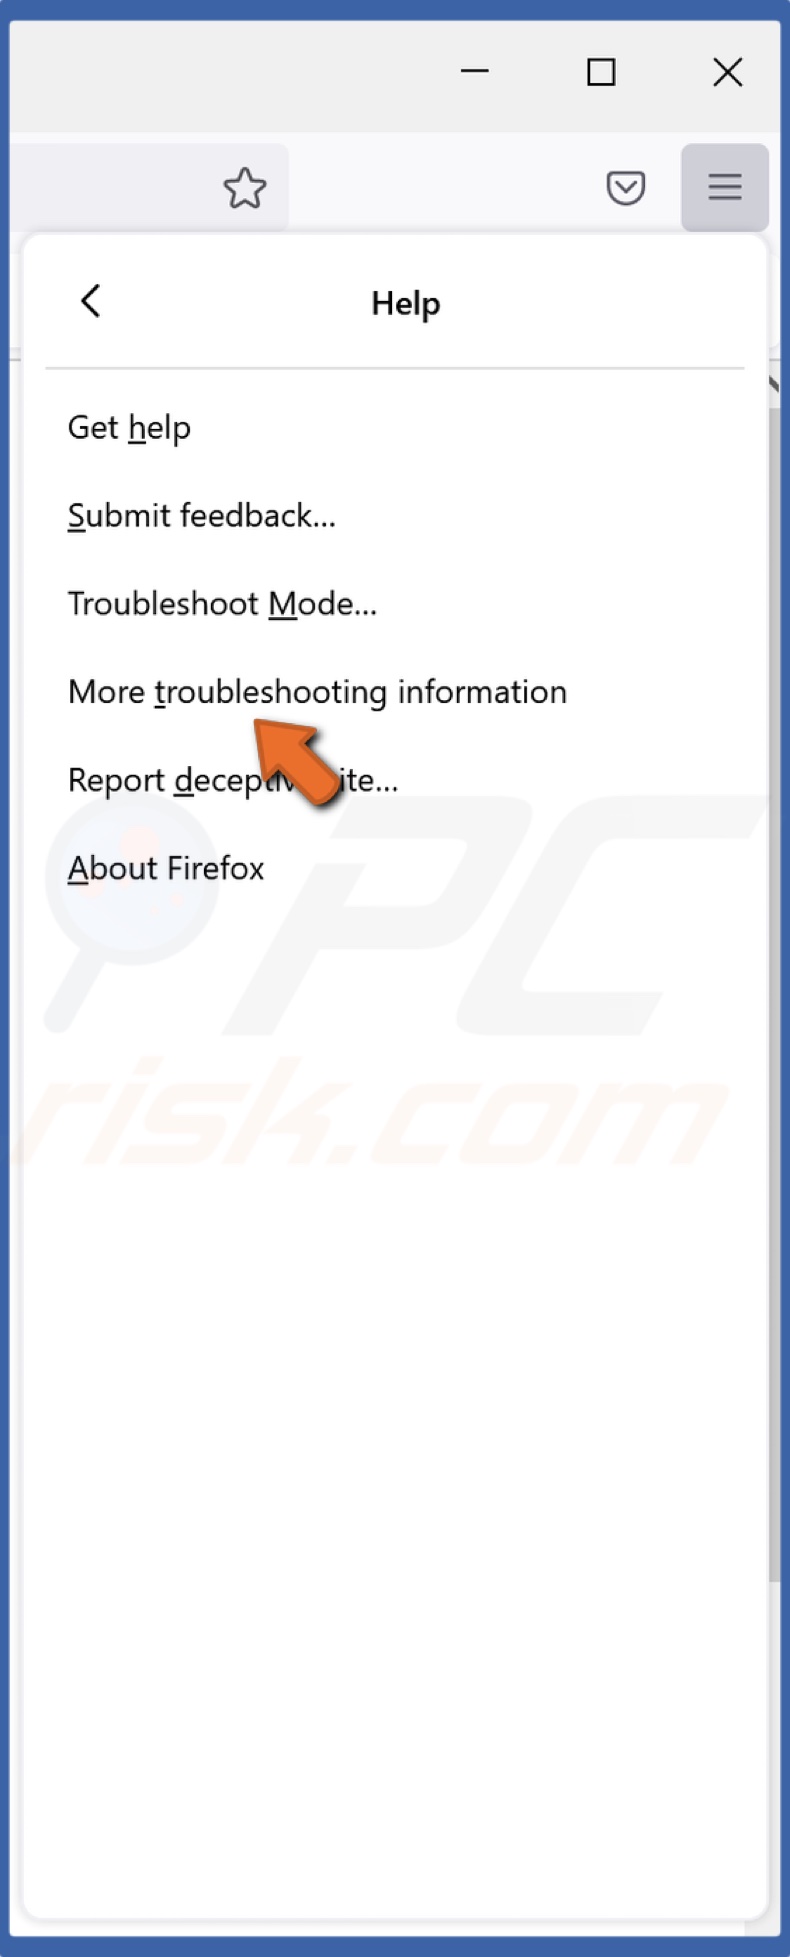 Click More troubleshooting information